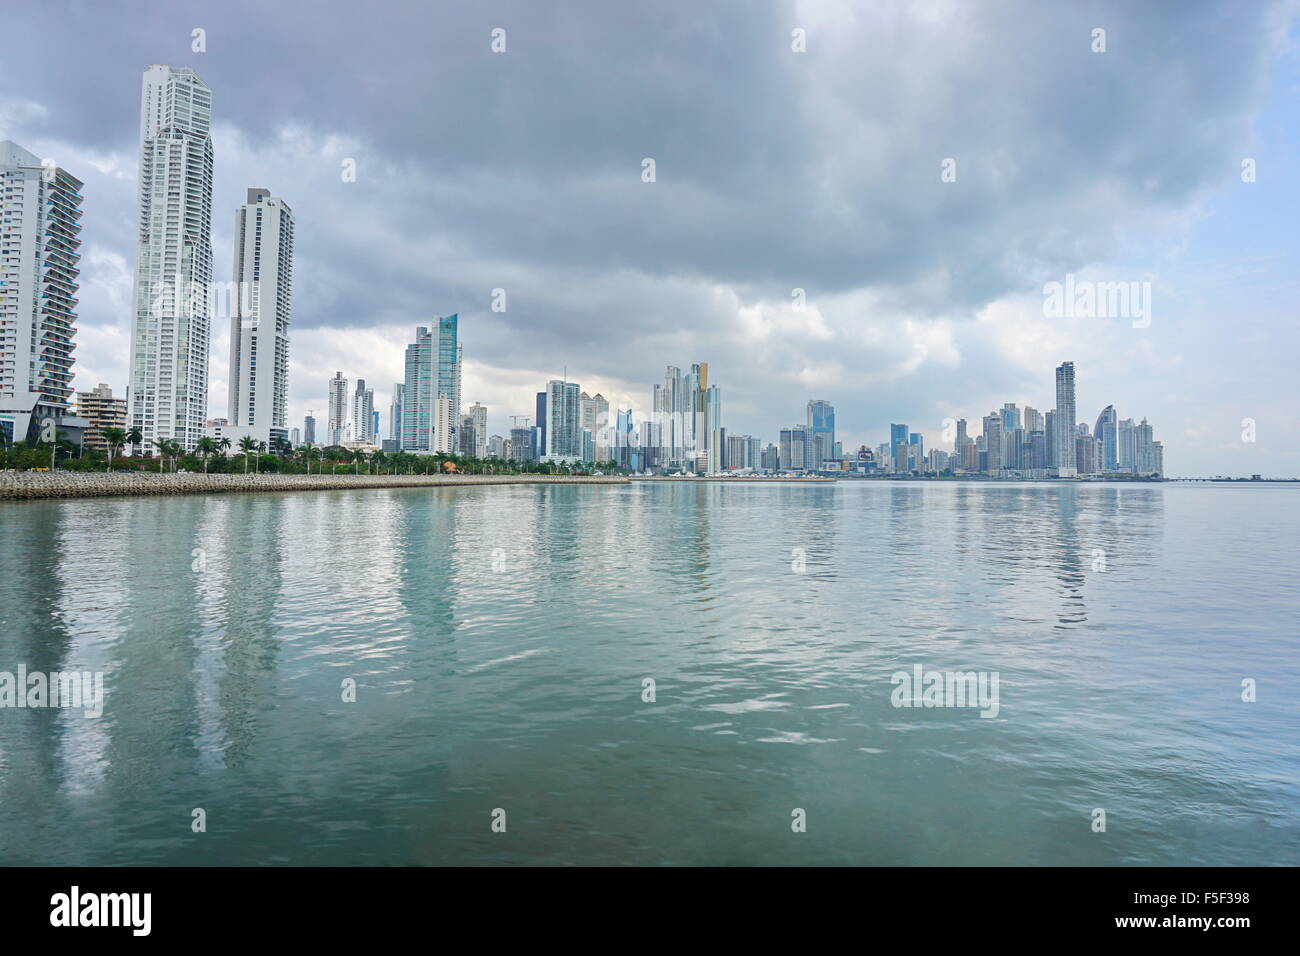 Pacific ocean coastline with Panama City skyscrapers and cloudy sky, Panama, Central America Stock Photo